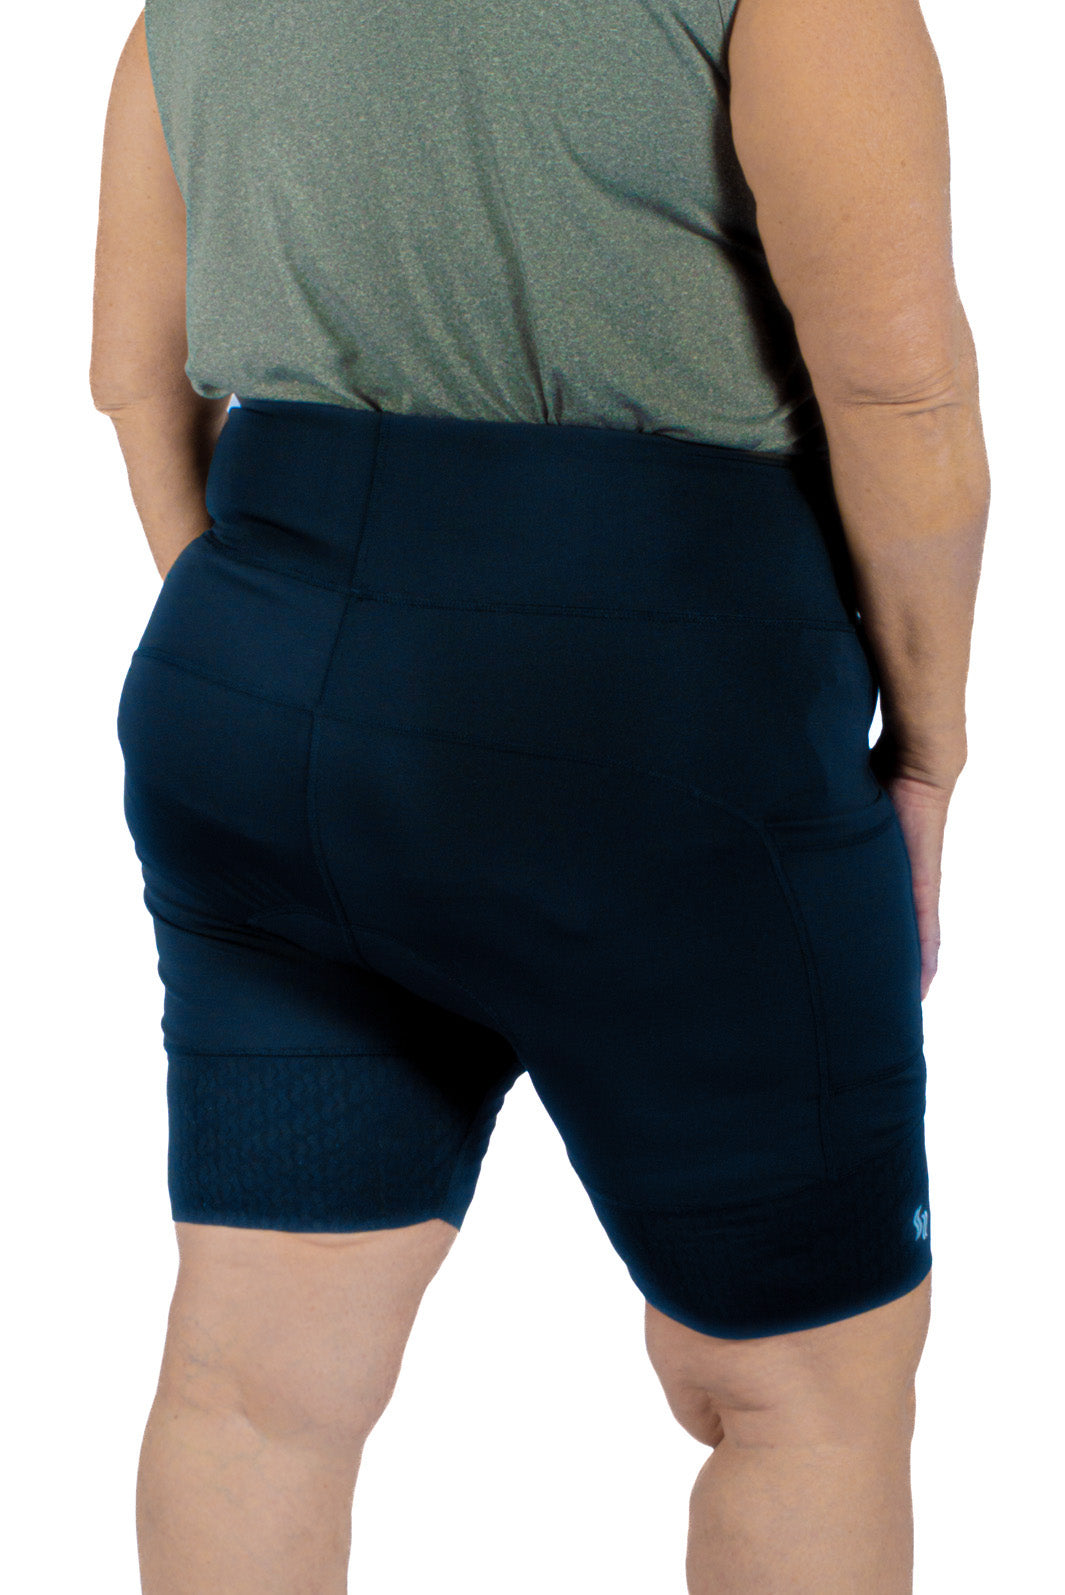 from Size Cycling Plus Shorts Latitude Plus Sportive